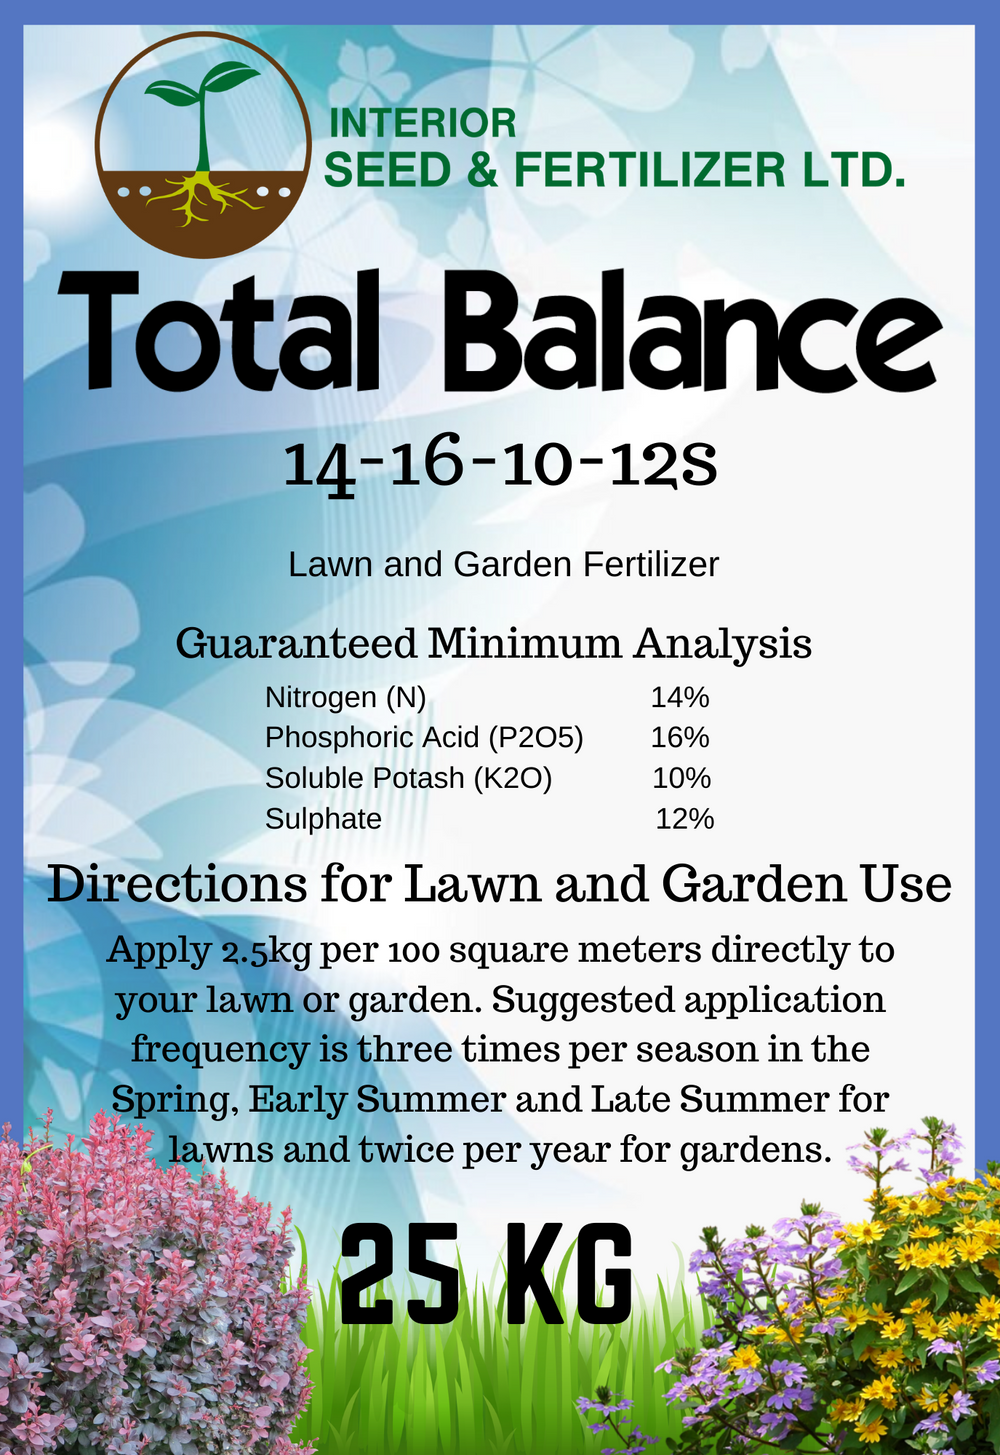 Total Balance Lawn and Garden Fertilizer.A superior balanced formula that supports all around plant health. An ideal blend for starting a new lawn or feeding flower and garden beds. Promotes fast green up and sustained root growth. From Interior Seed and Fertilizer Cranbrook BC 